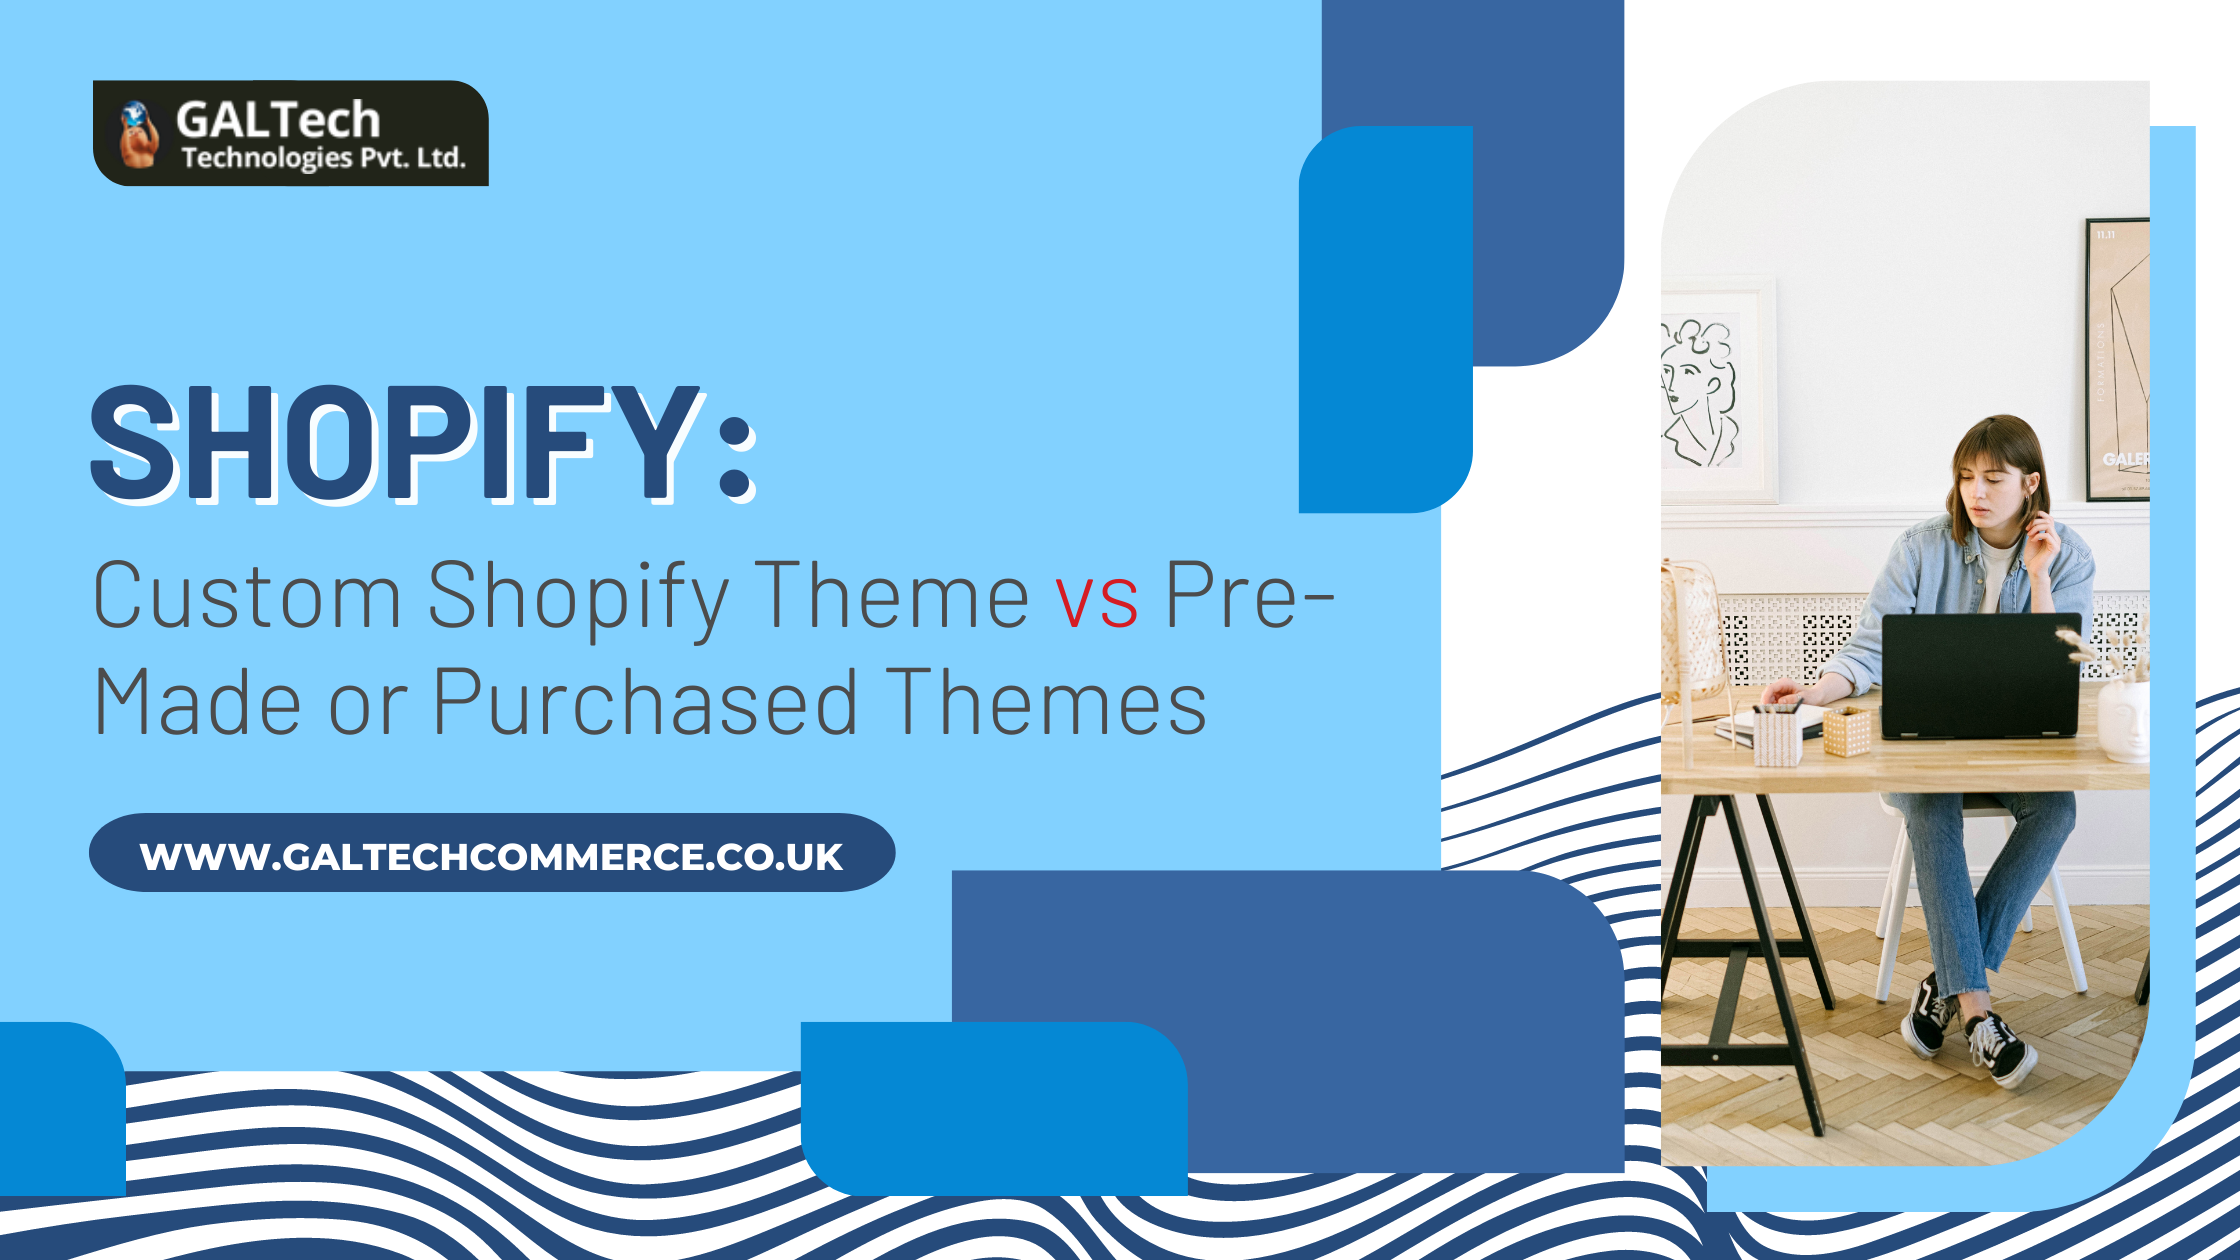 Shopify: Custom Shopify Theme vs Pre-Made or Purchased Themes